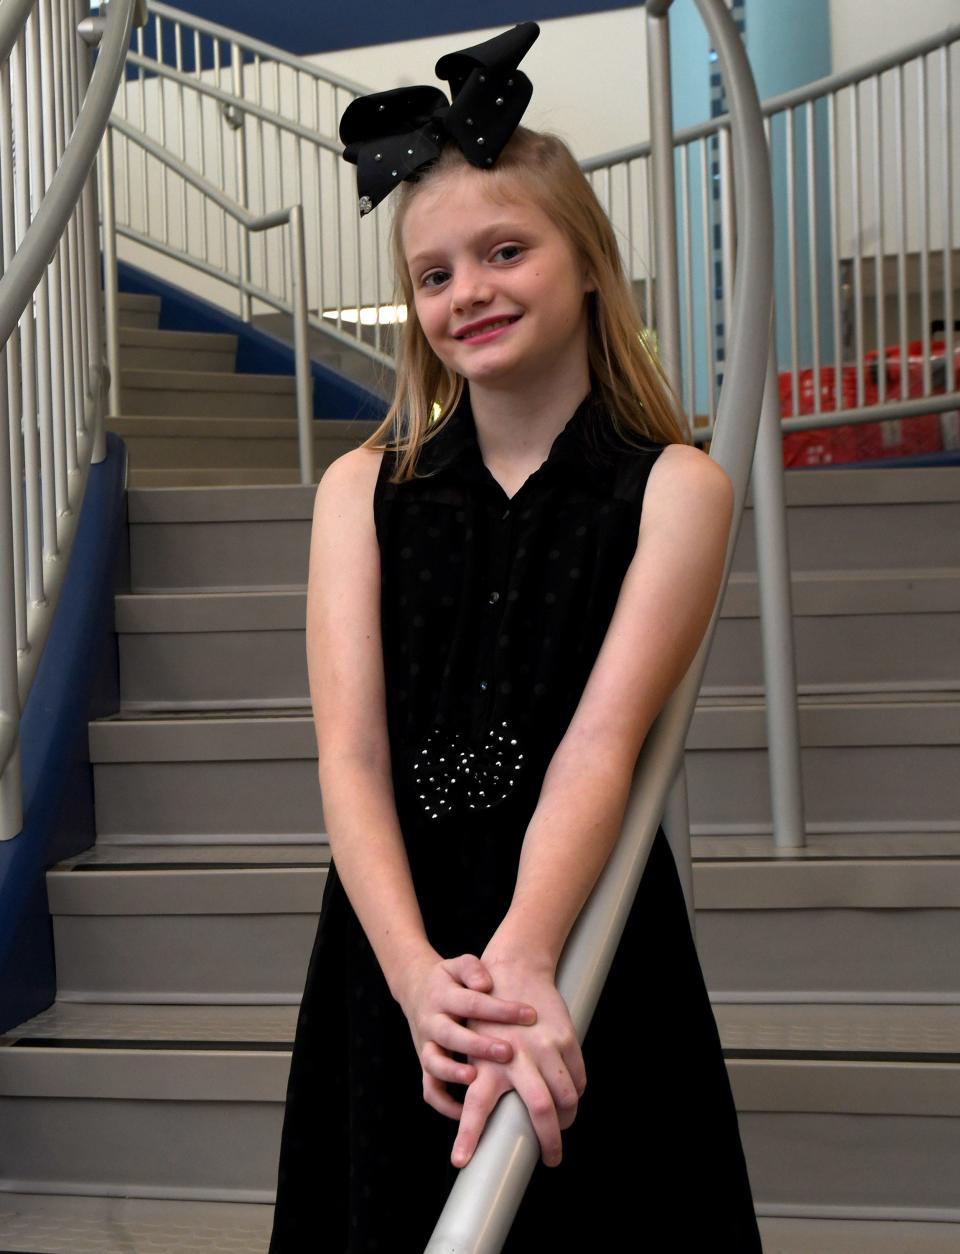 Audree Stucin, a fifth-grader at Louisville Elementary School, is The Alliance Review's Robertson Kitchen & Bath Kid of Character for October. The 11-year-old was photographed Wednesday, Oct. 11, 2023, at school.